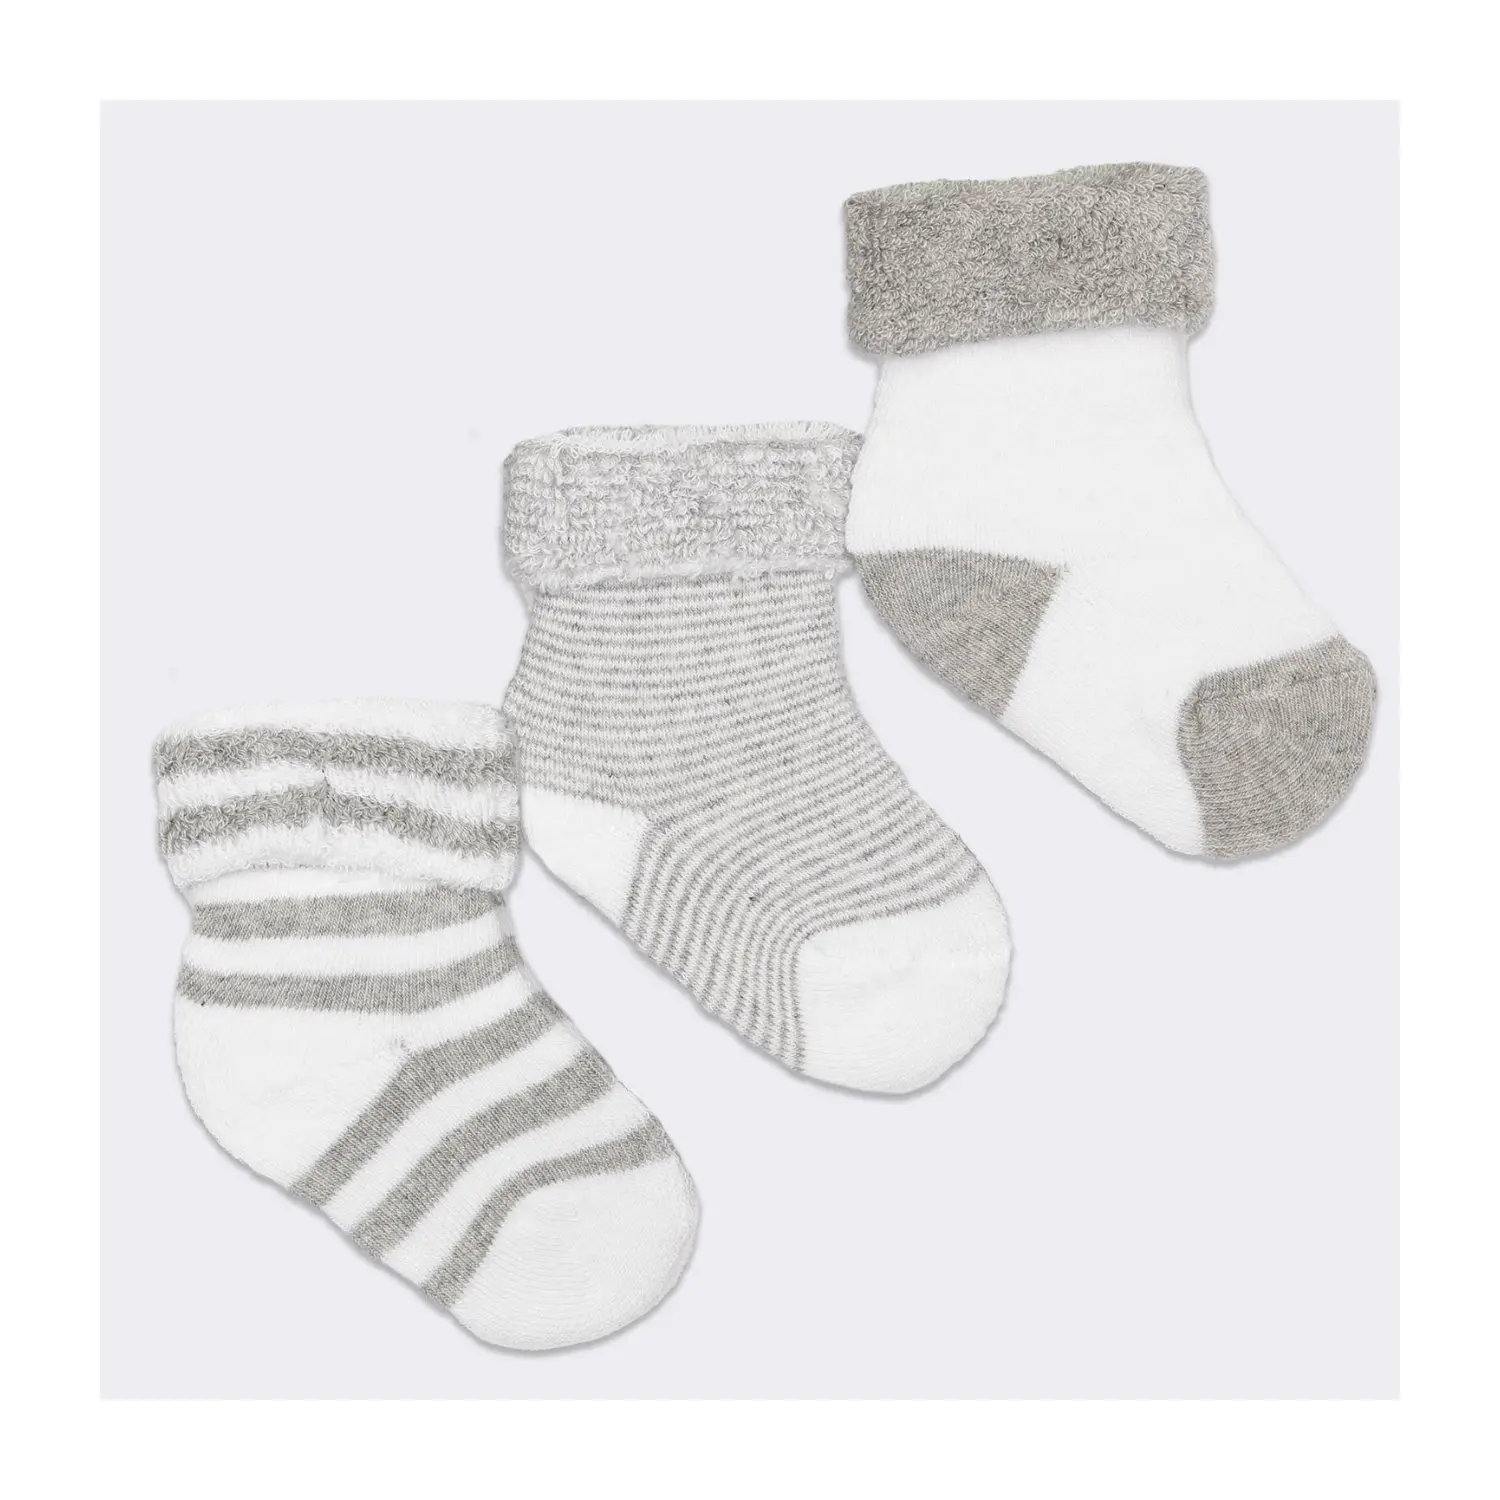 Factory Wholesale - Made in Italy Socks Baby different Patterns - Organic Cotton Baby Socks for Boys and Girls - kids socks